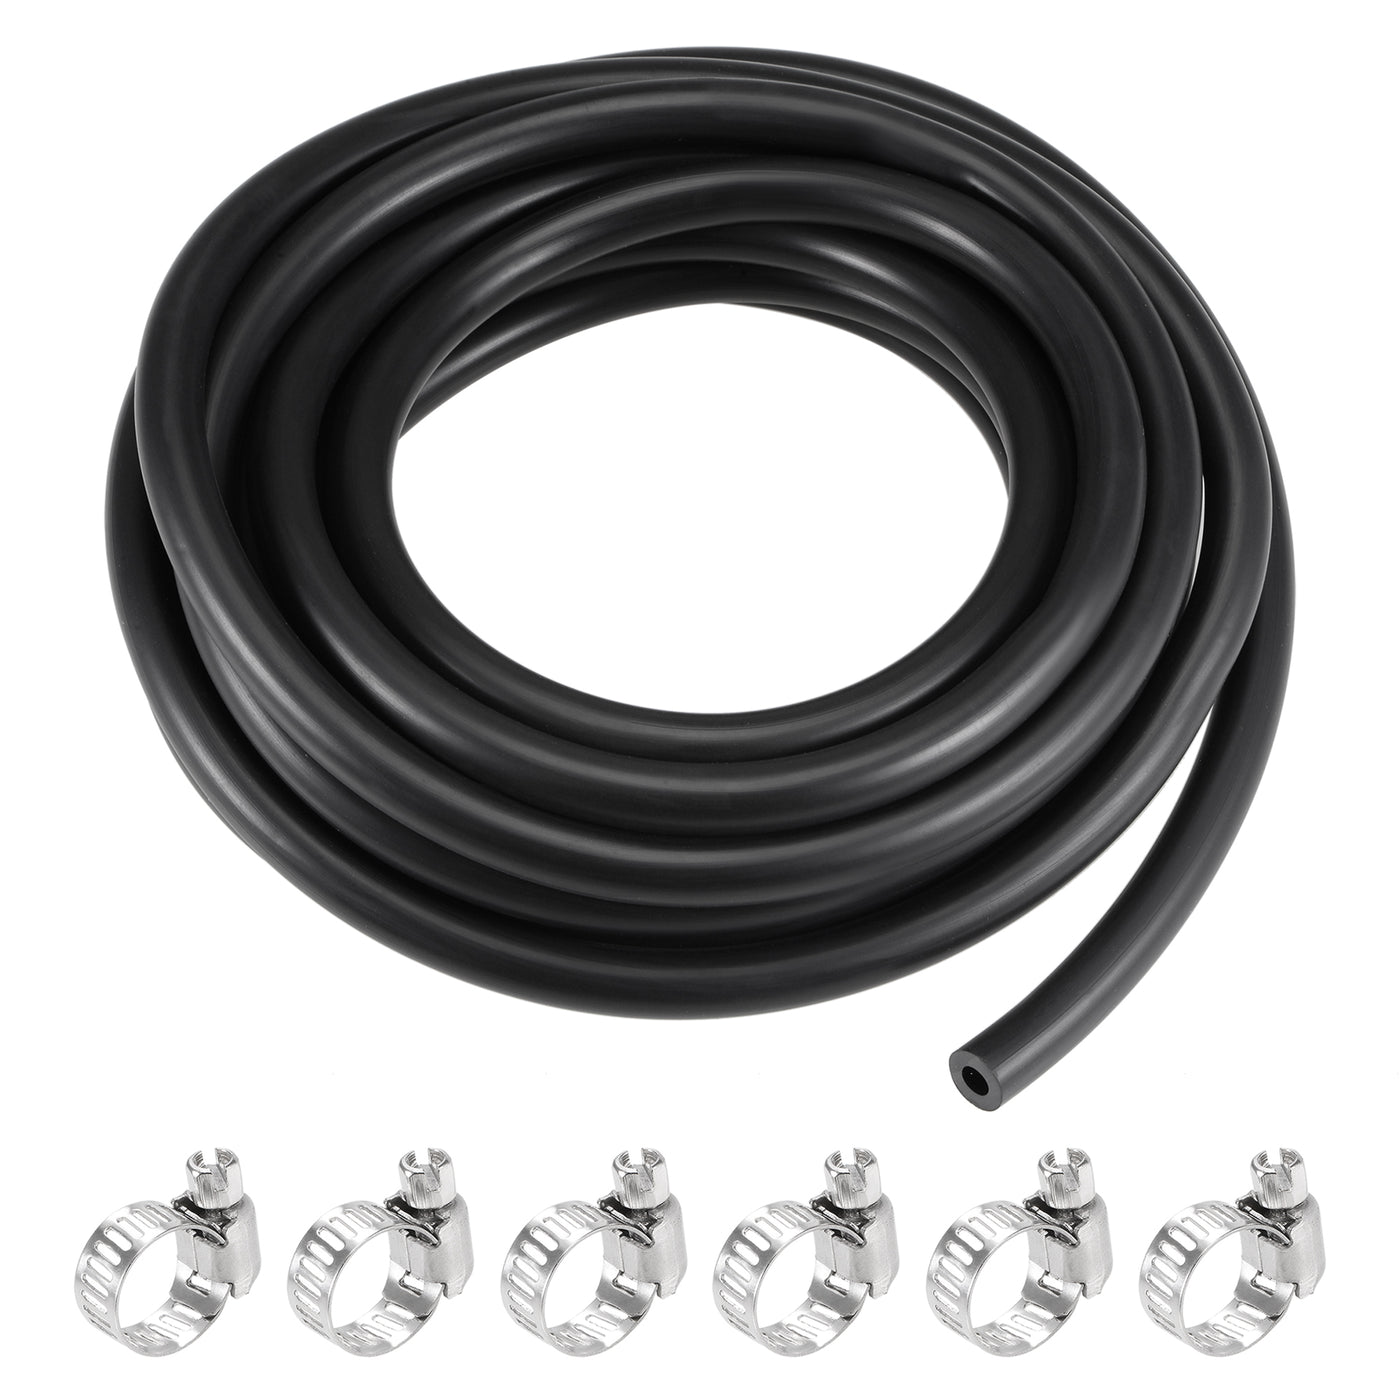 Uxcell Uxcell Fuel Line Hose 6mm(1/4") ID 10mm OD 16ft Oil Line & Fuel Pipe Rubber Water Hose Black, 6 Clamps